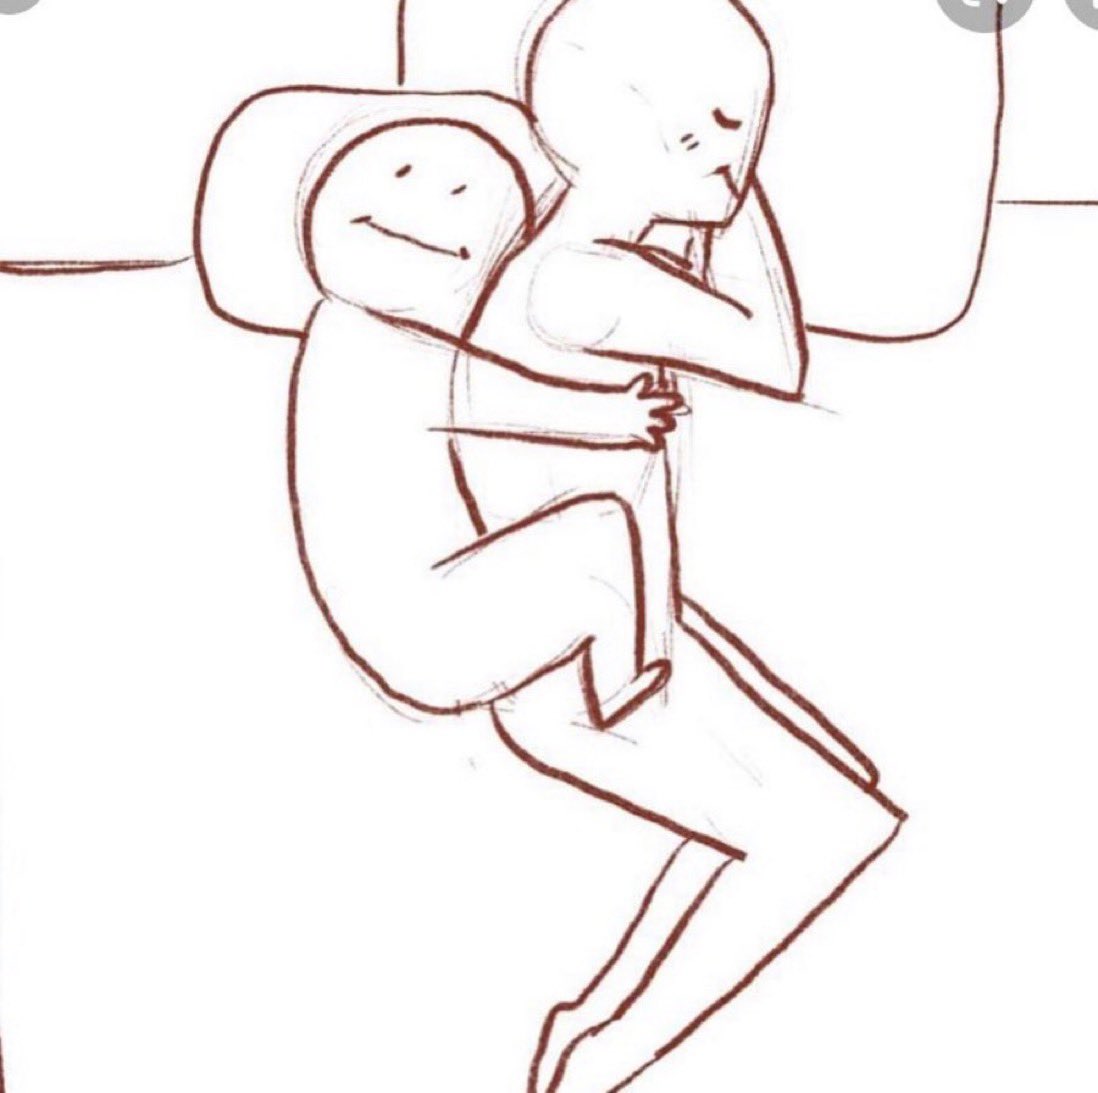 when he’s tall but you wanna be the big spoon